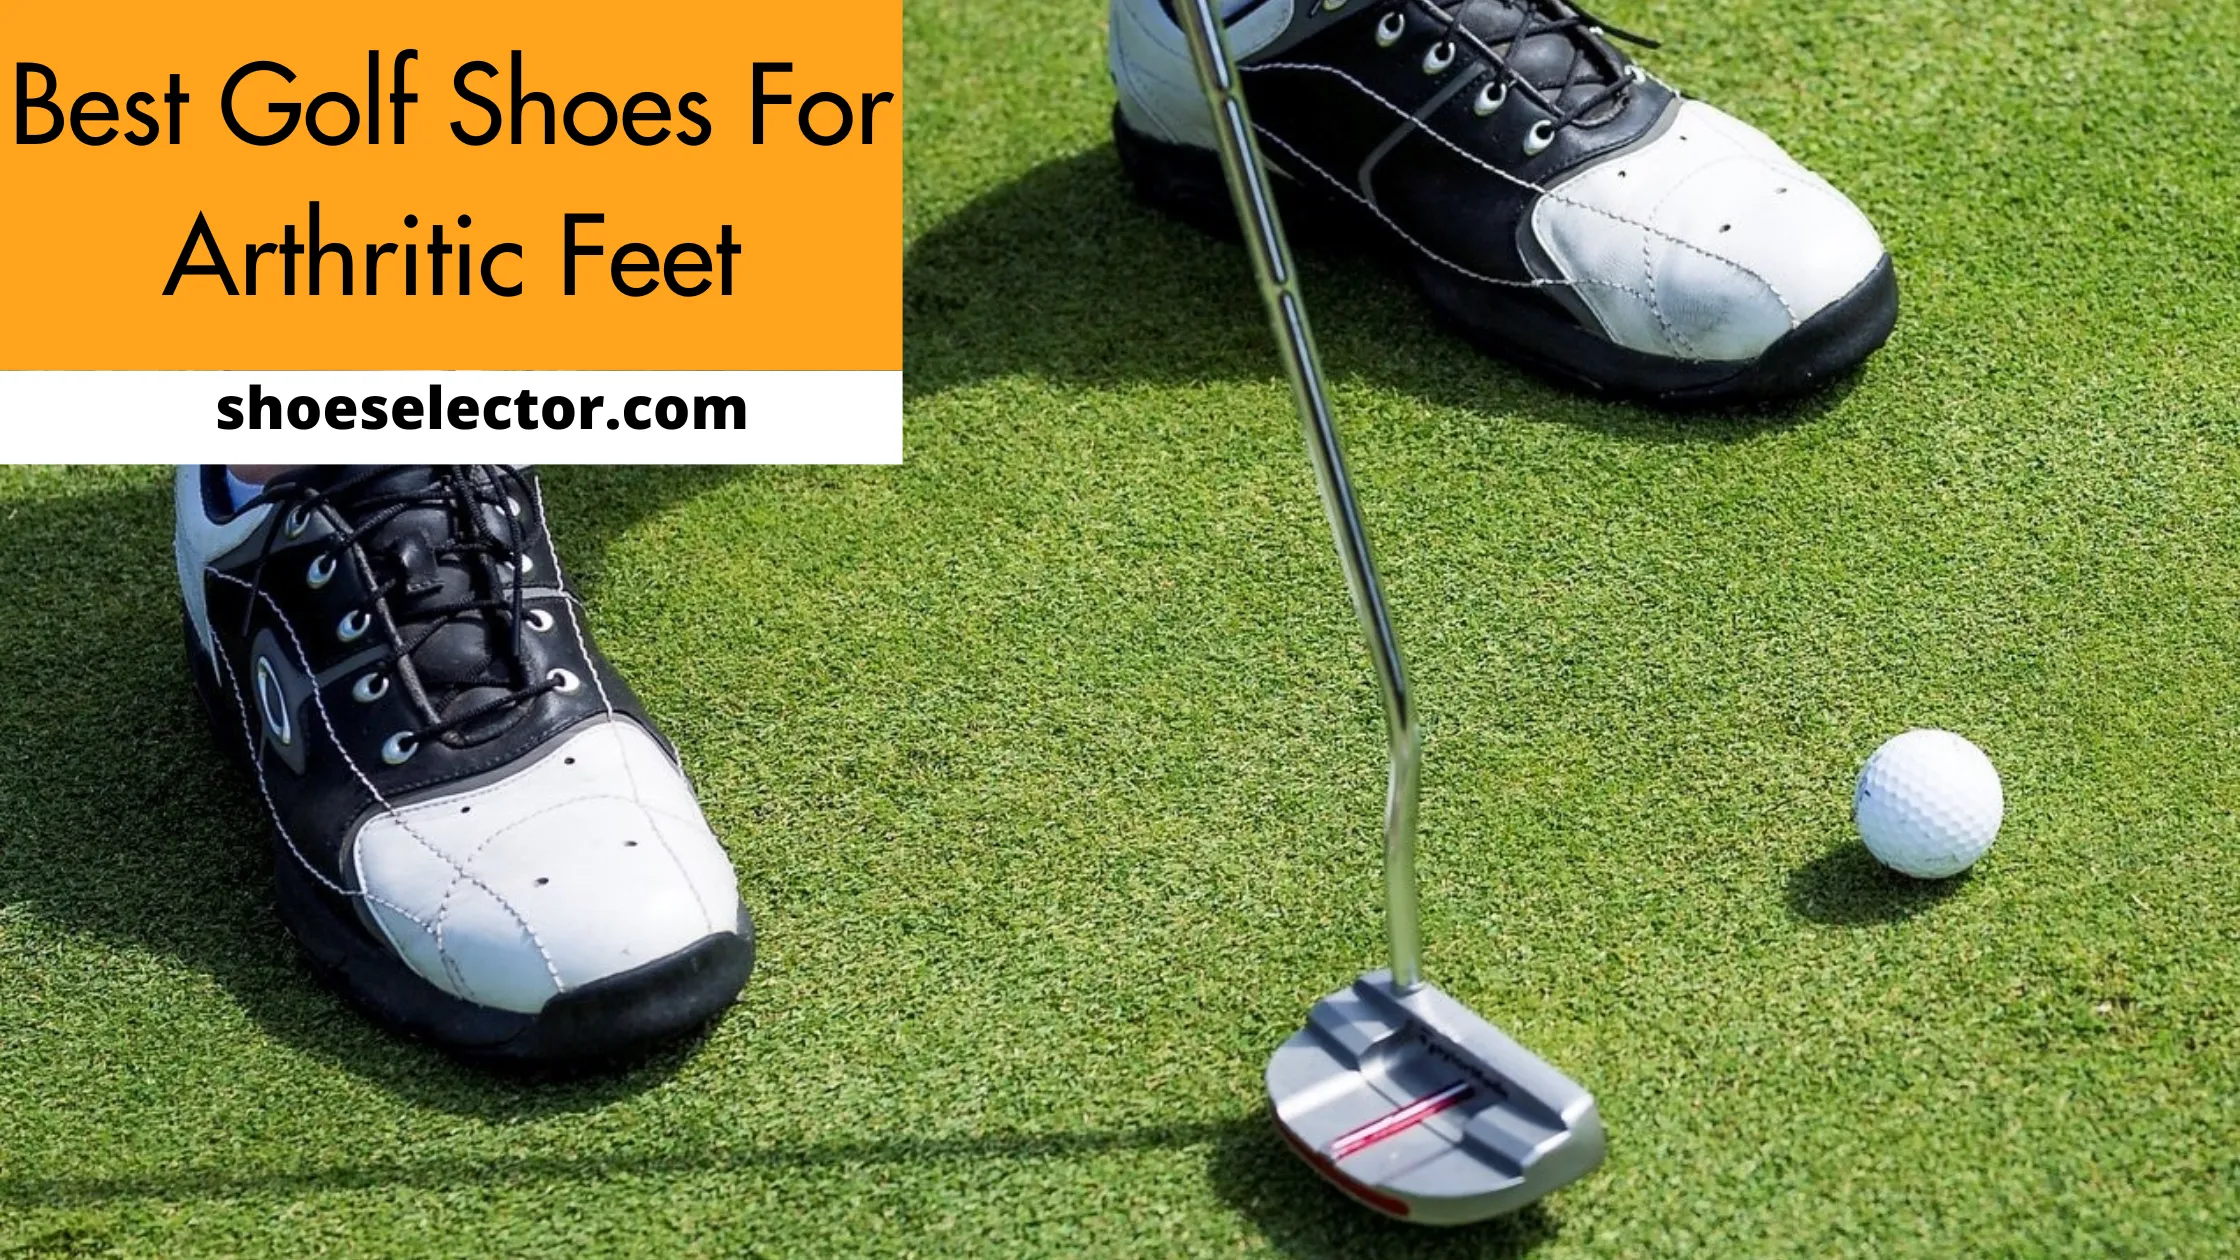 Best Golf Shoes For Arthritic Feet - Comprehensive Guide